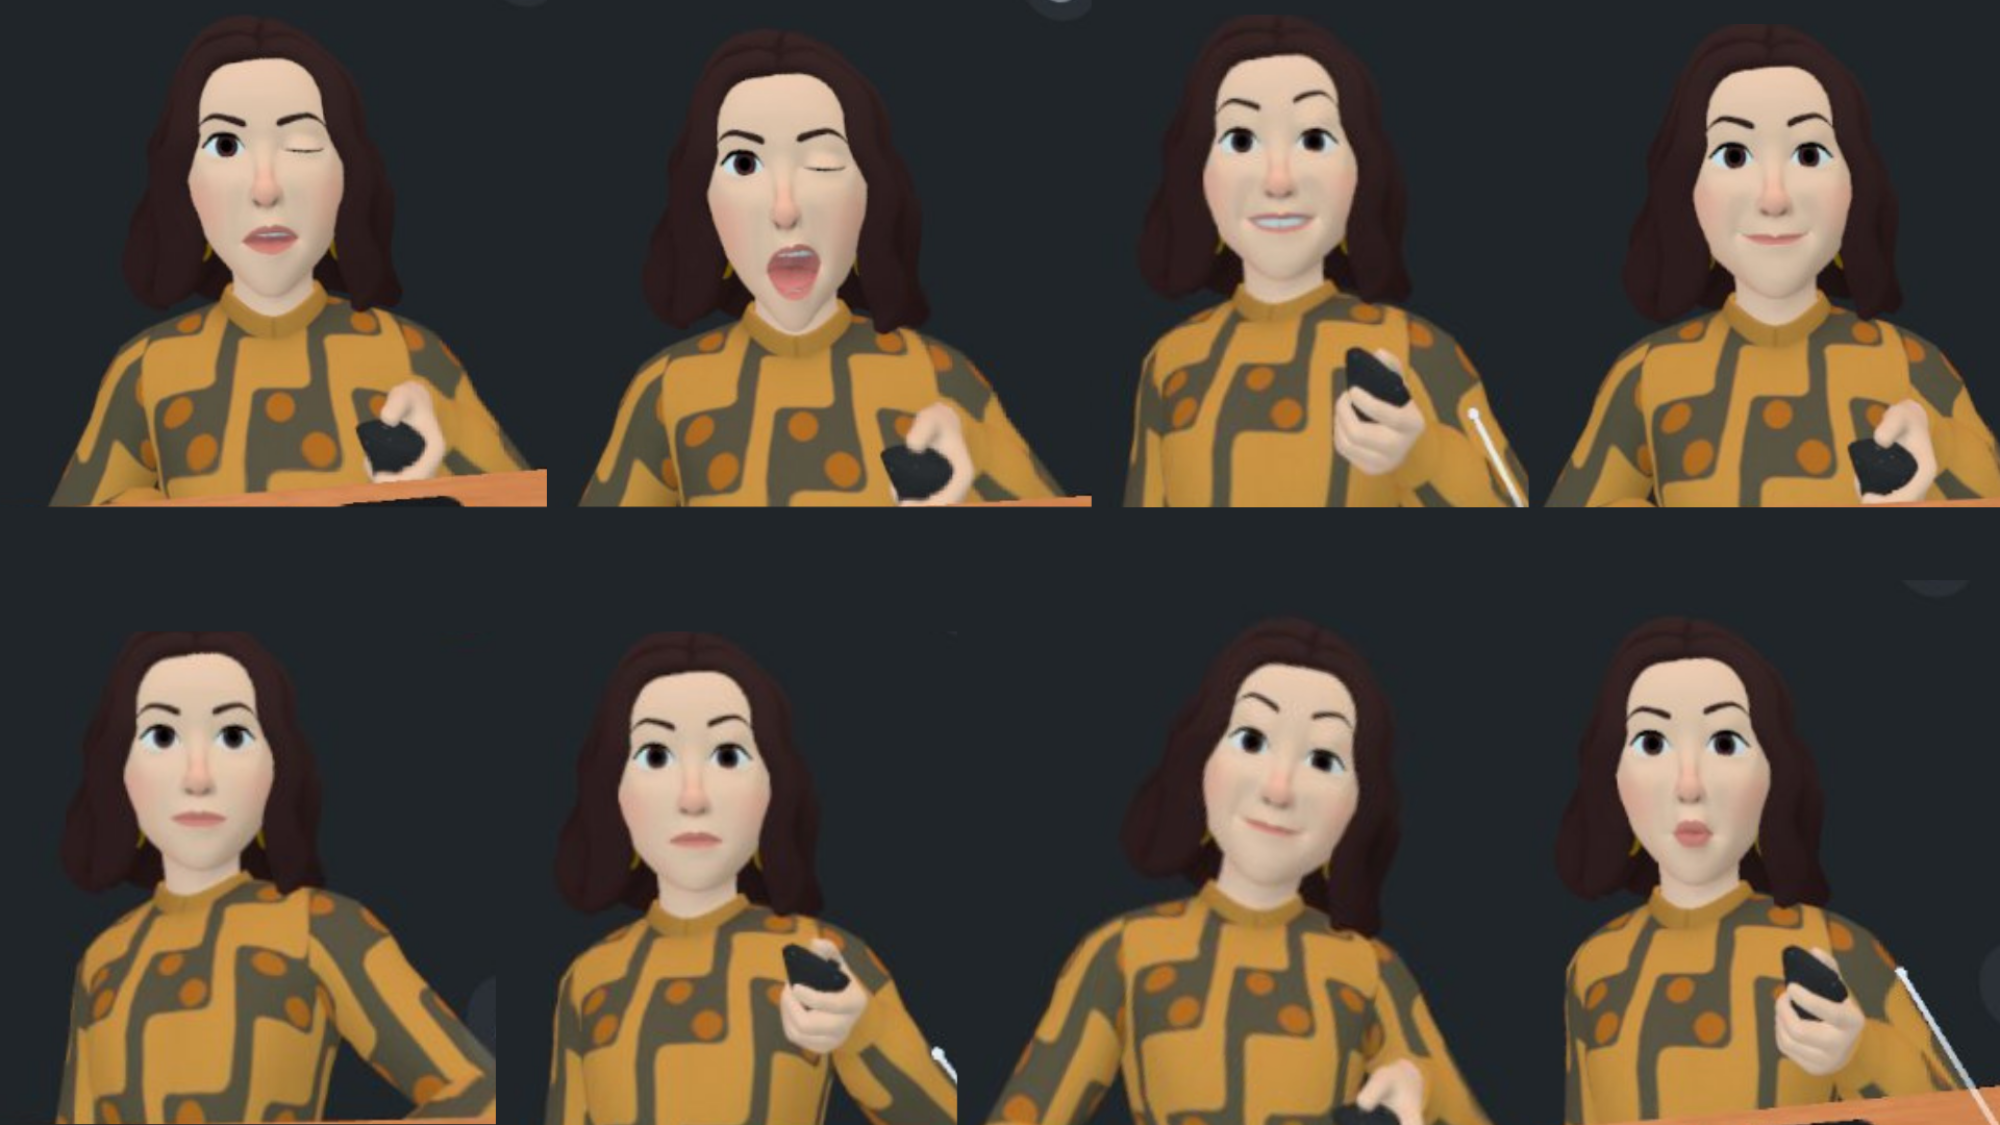 Eight screenshots of the same avatar of a woman with short brown hair, brown eyes, and a mustard colored printed dress.